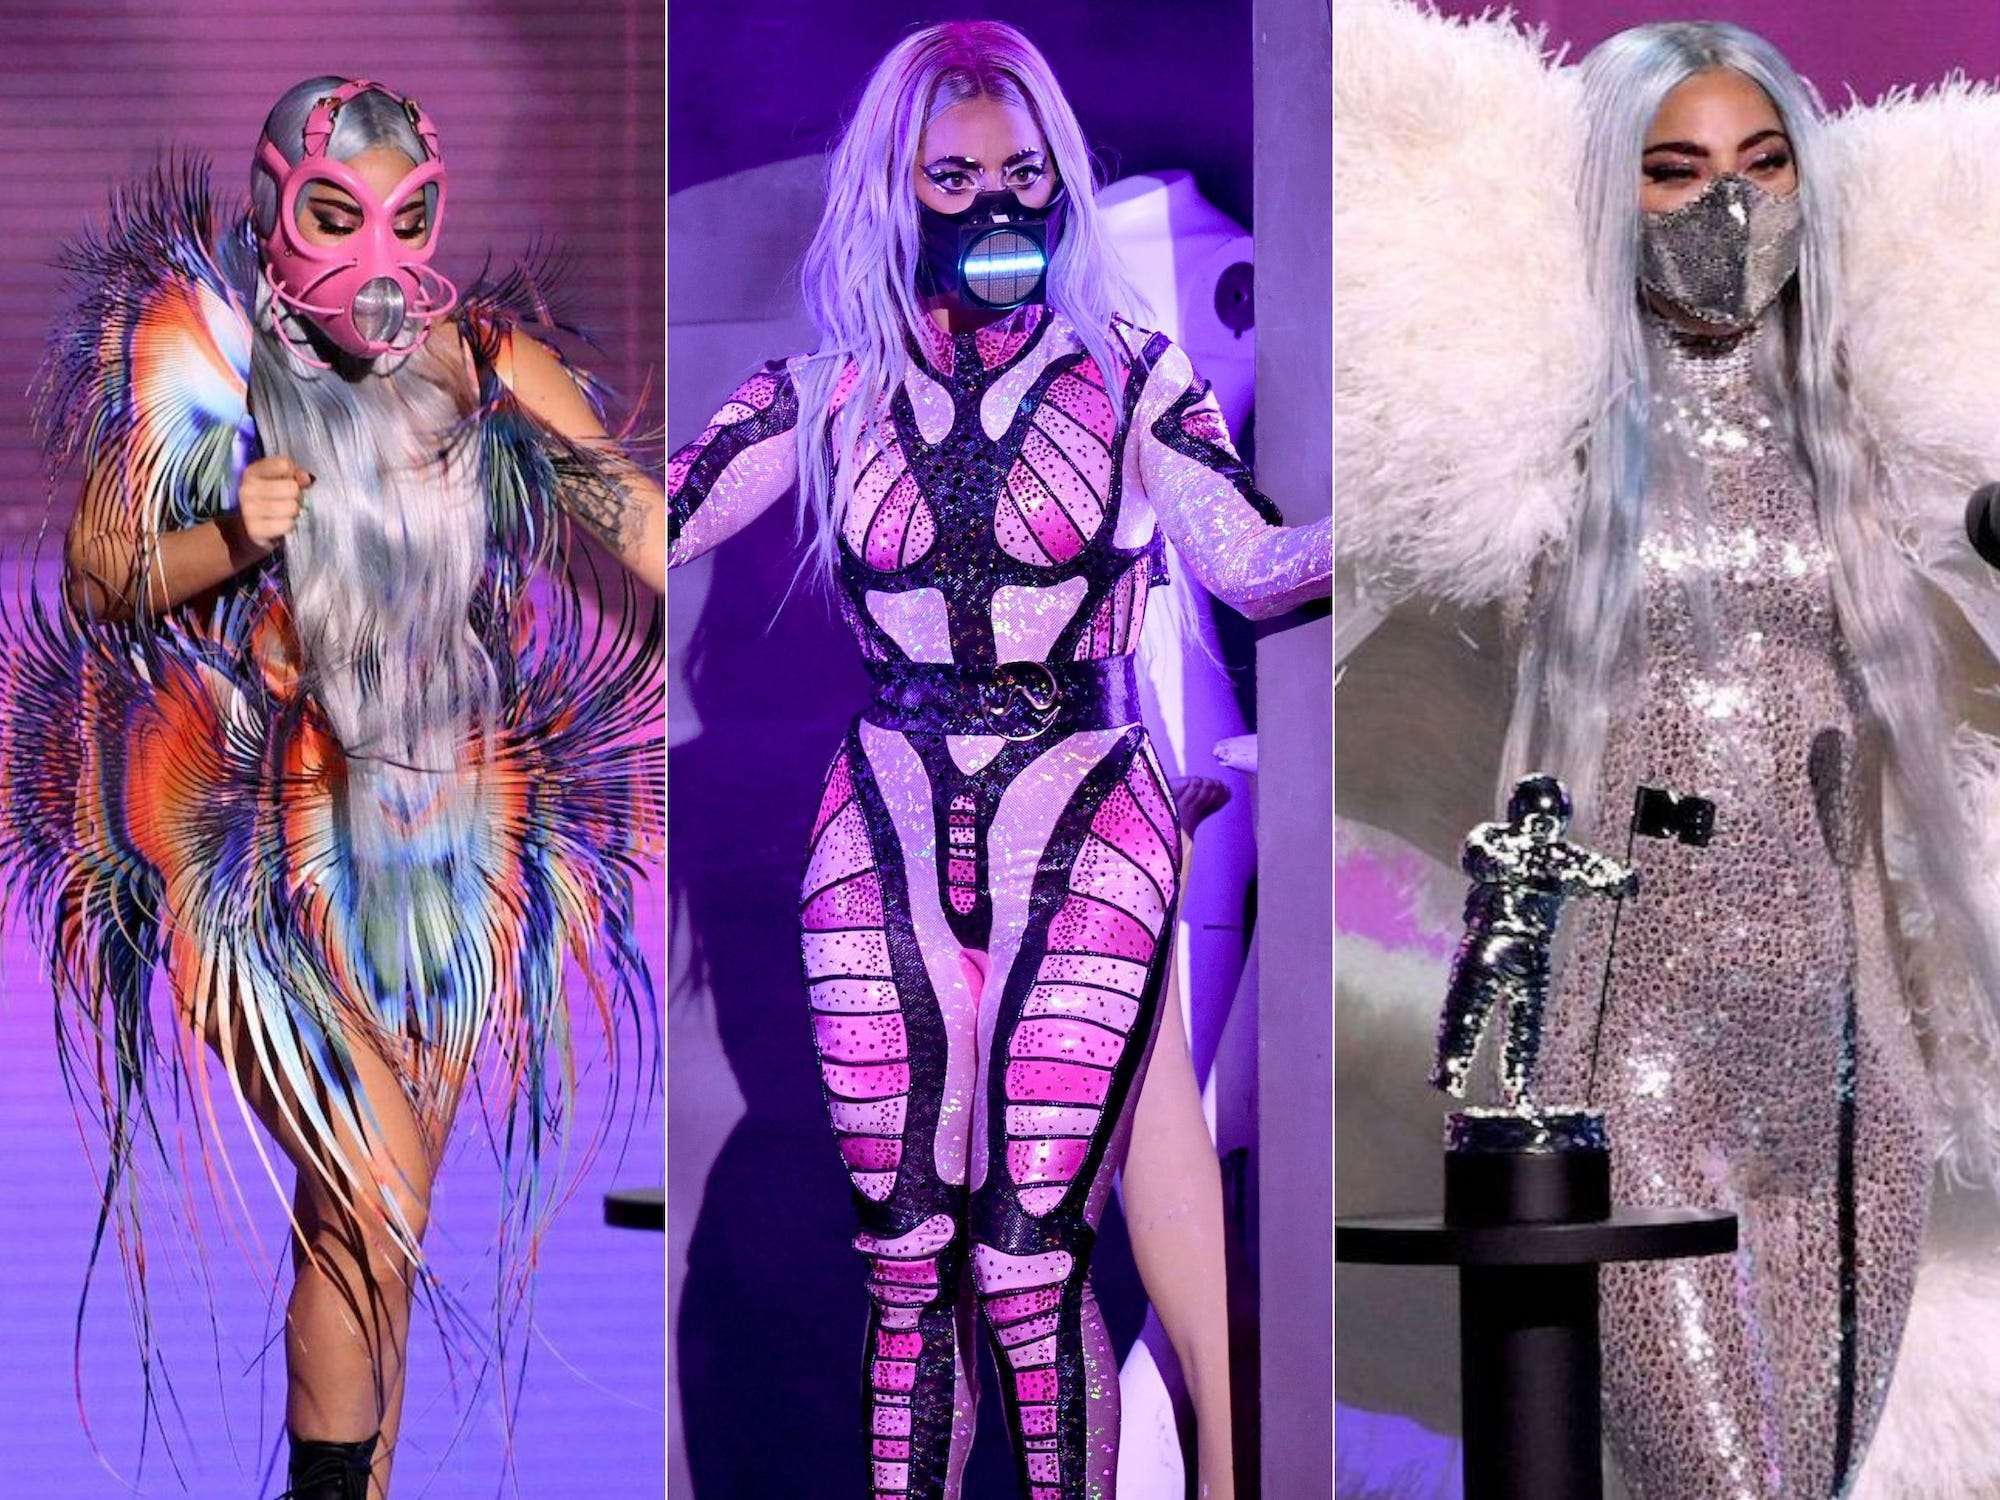 3 images of Lady Gaga at her VMA performance